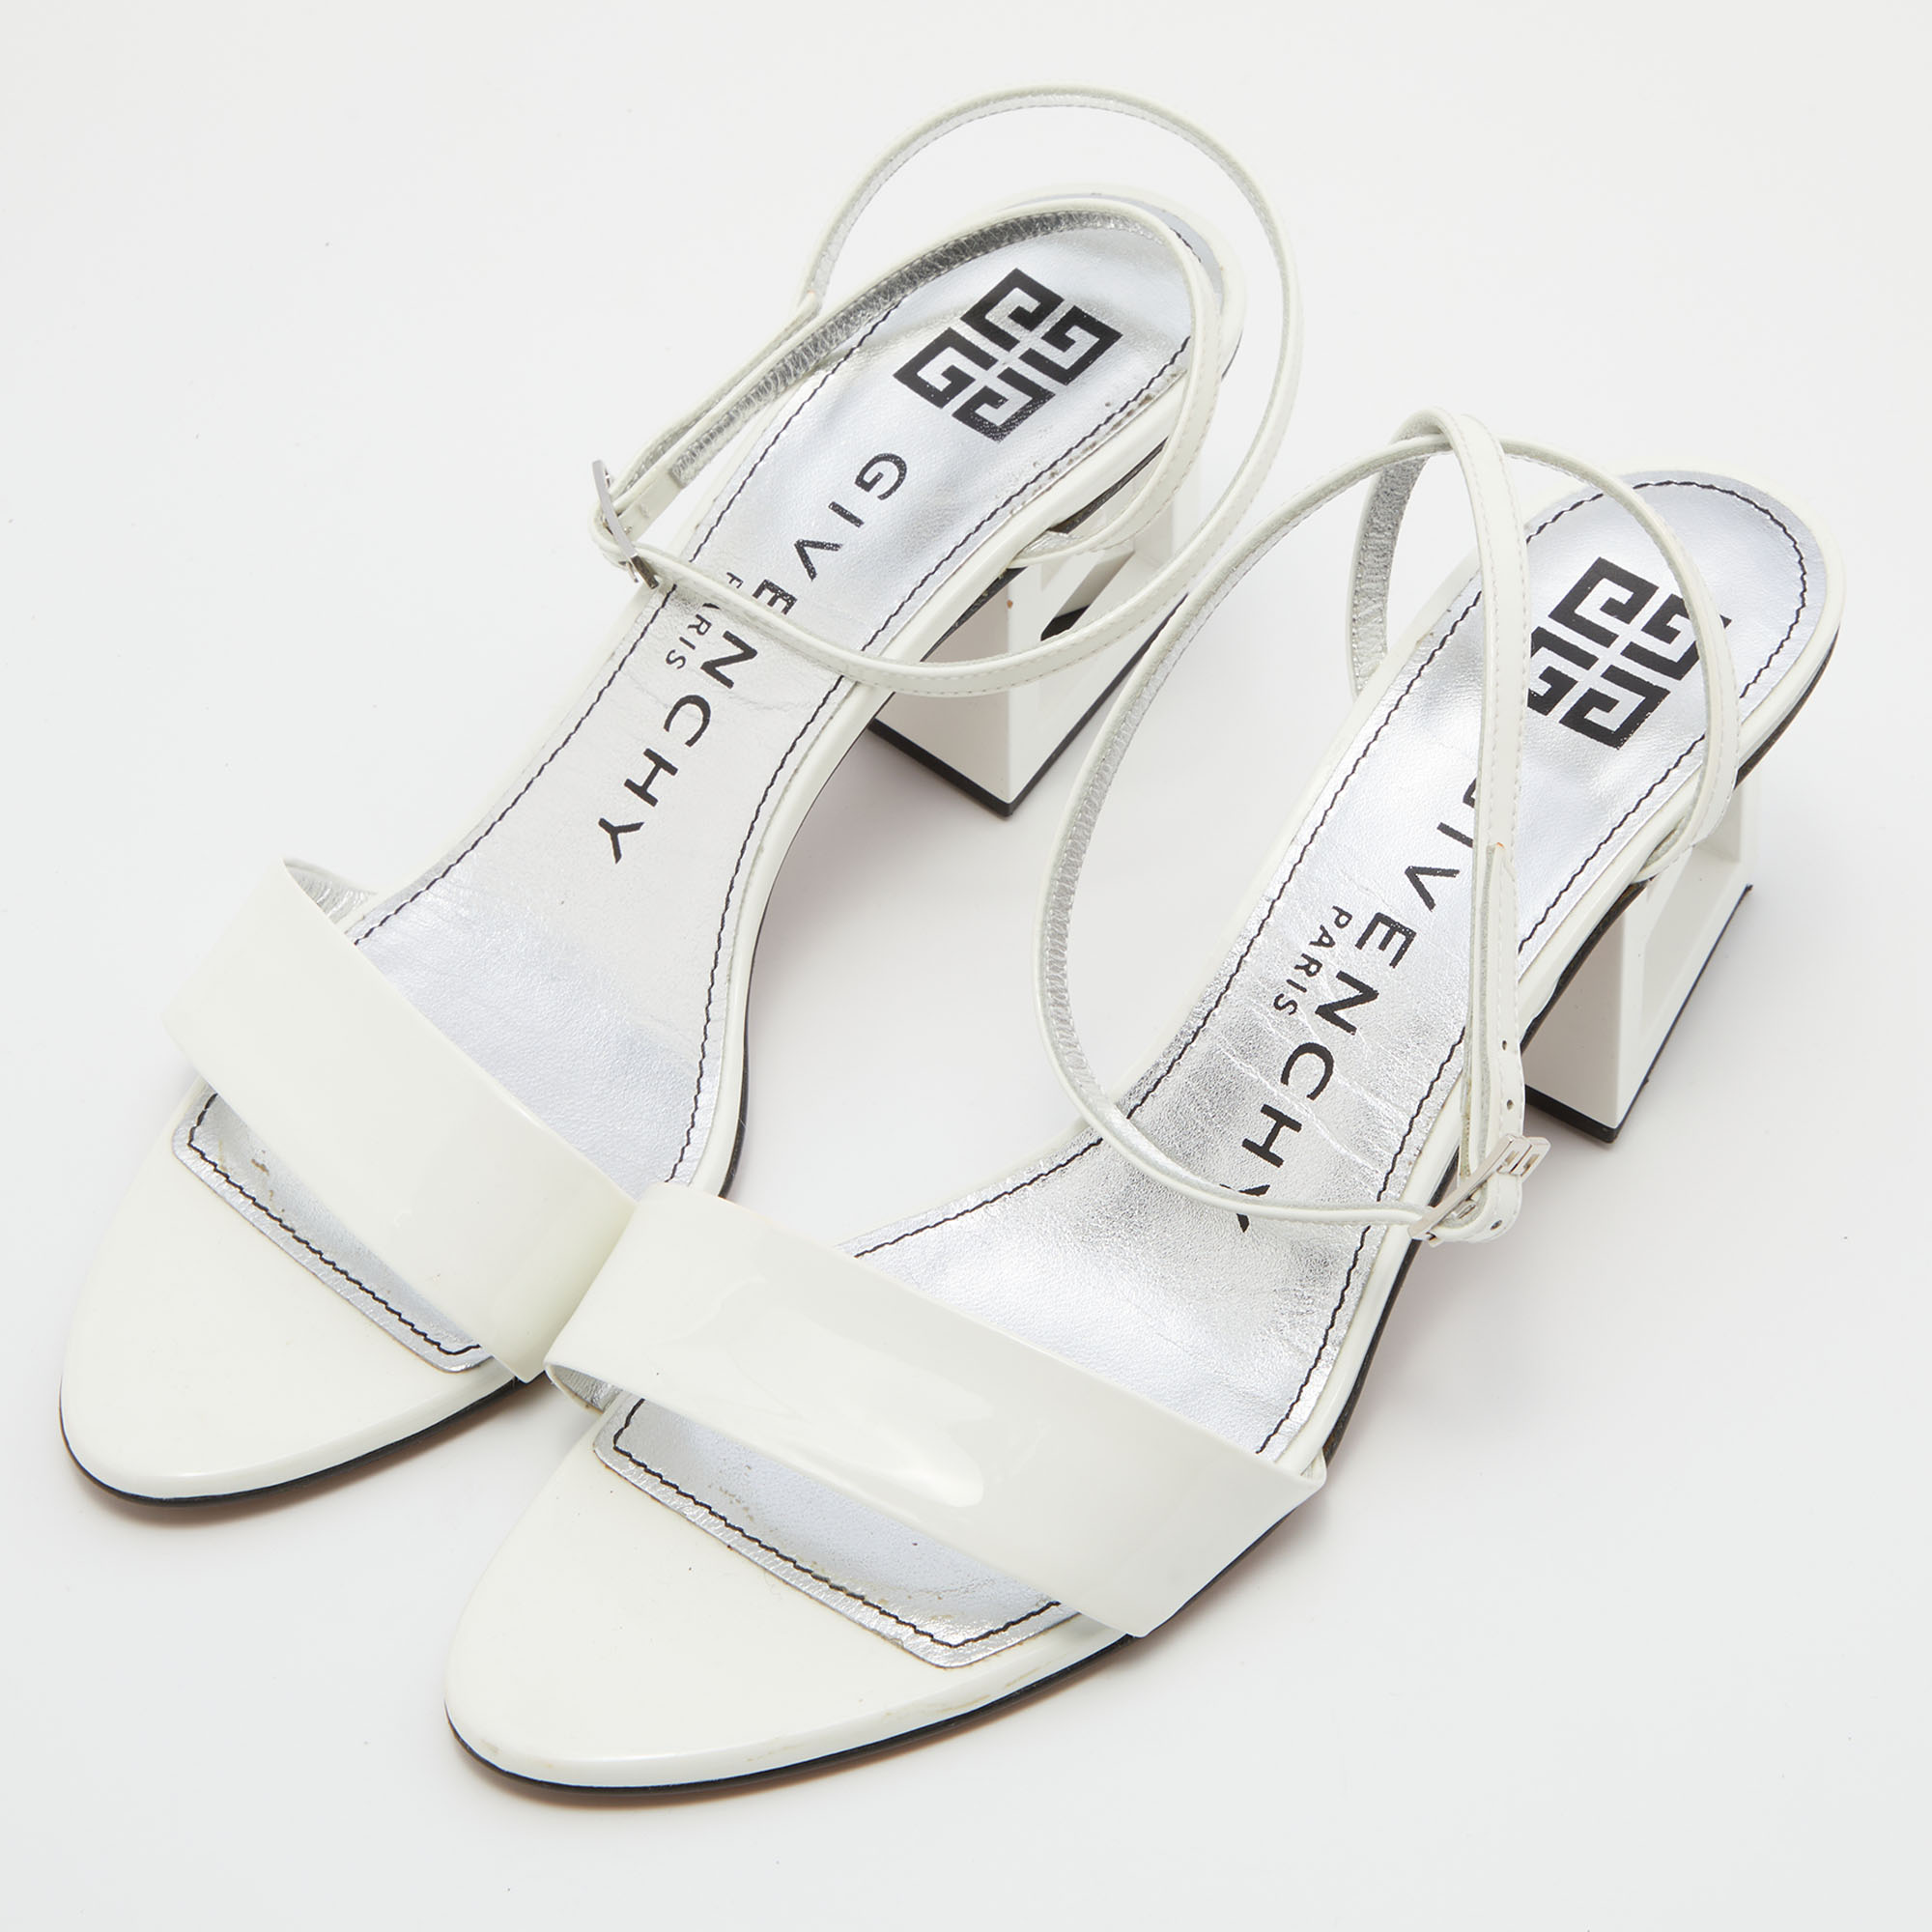 

Givenchy White Patent Leather Triangle Ankle Strap Sandals Size